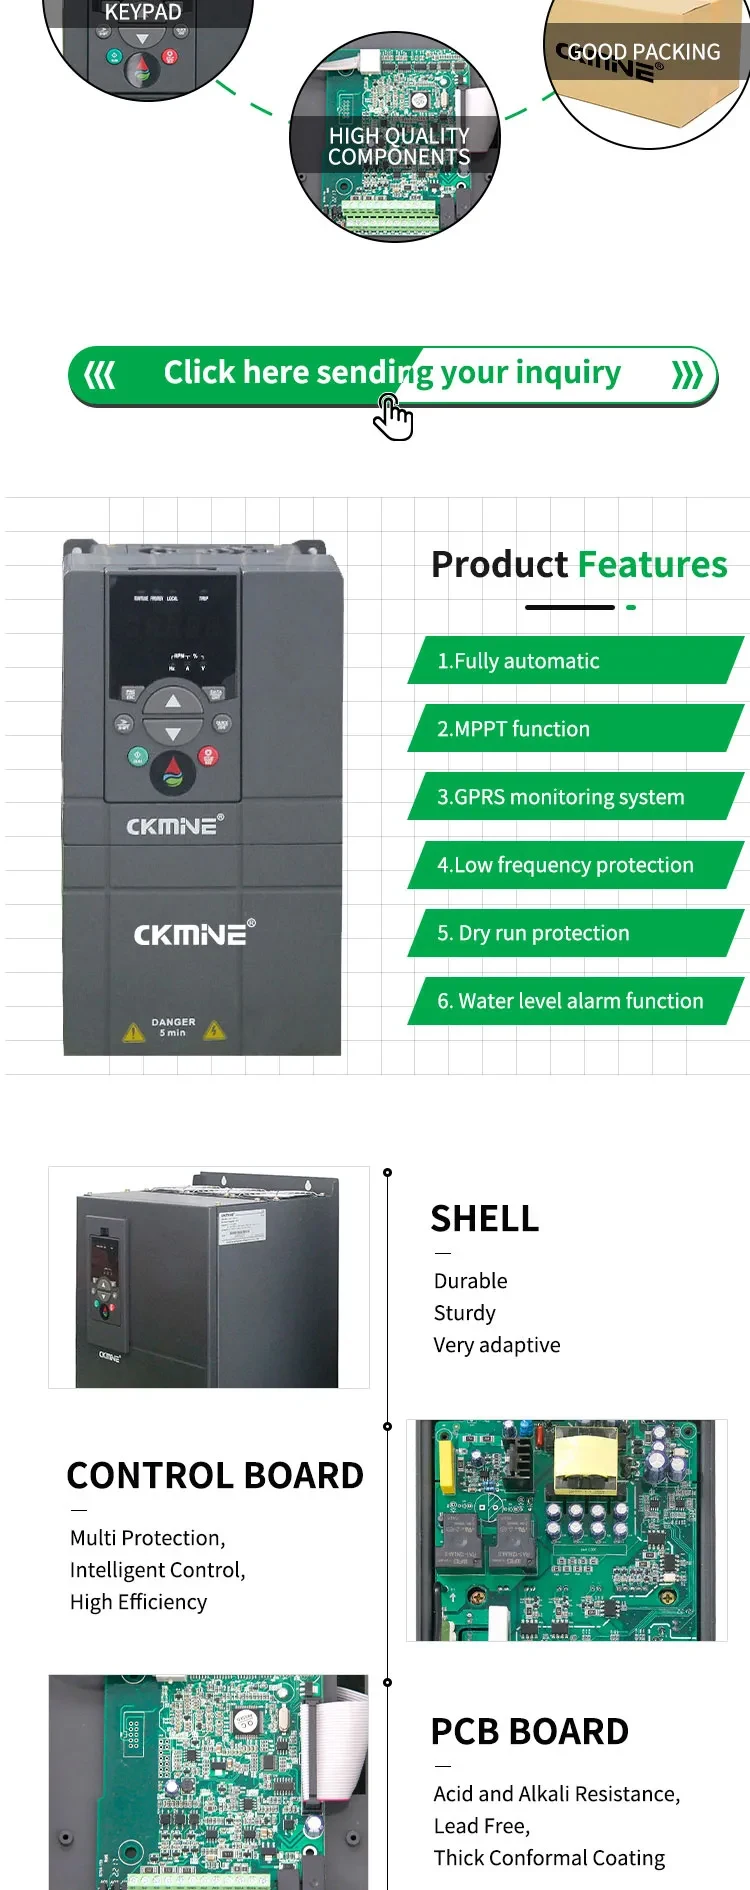 CKMINE Hot Sale Water Pump Inverter 380V Three Phase MPPT Off Grid 0.75kW 1HP Solar VFD Pump Frequency Motor Drive for Farm details